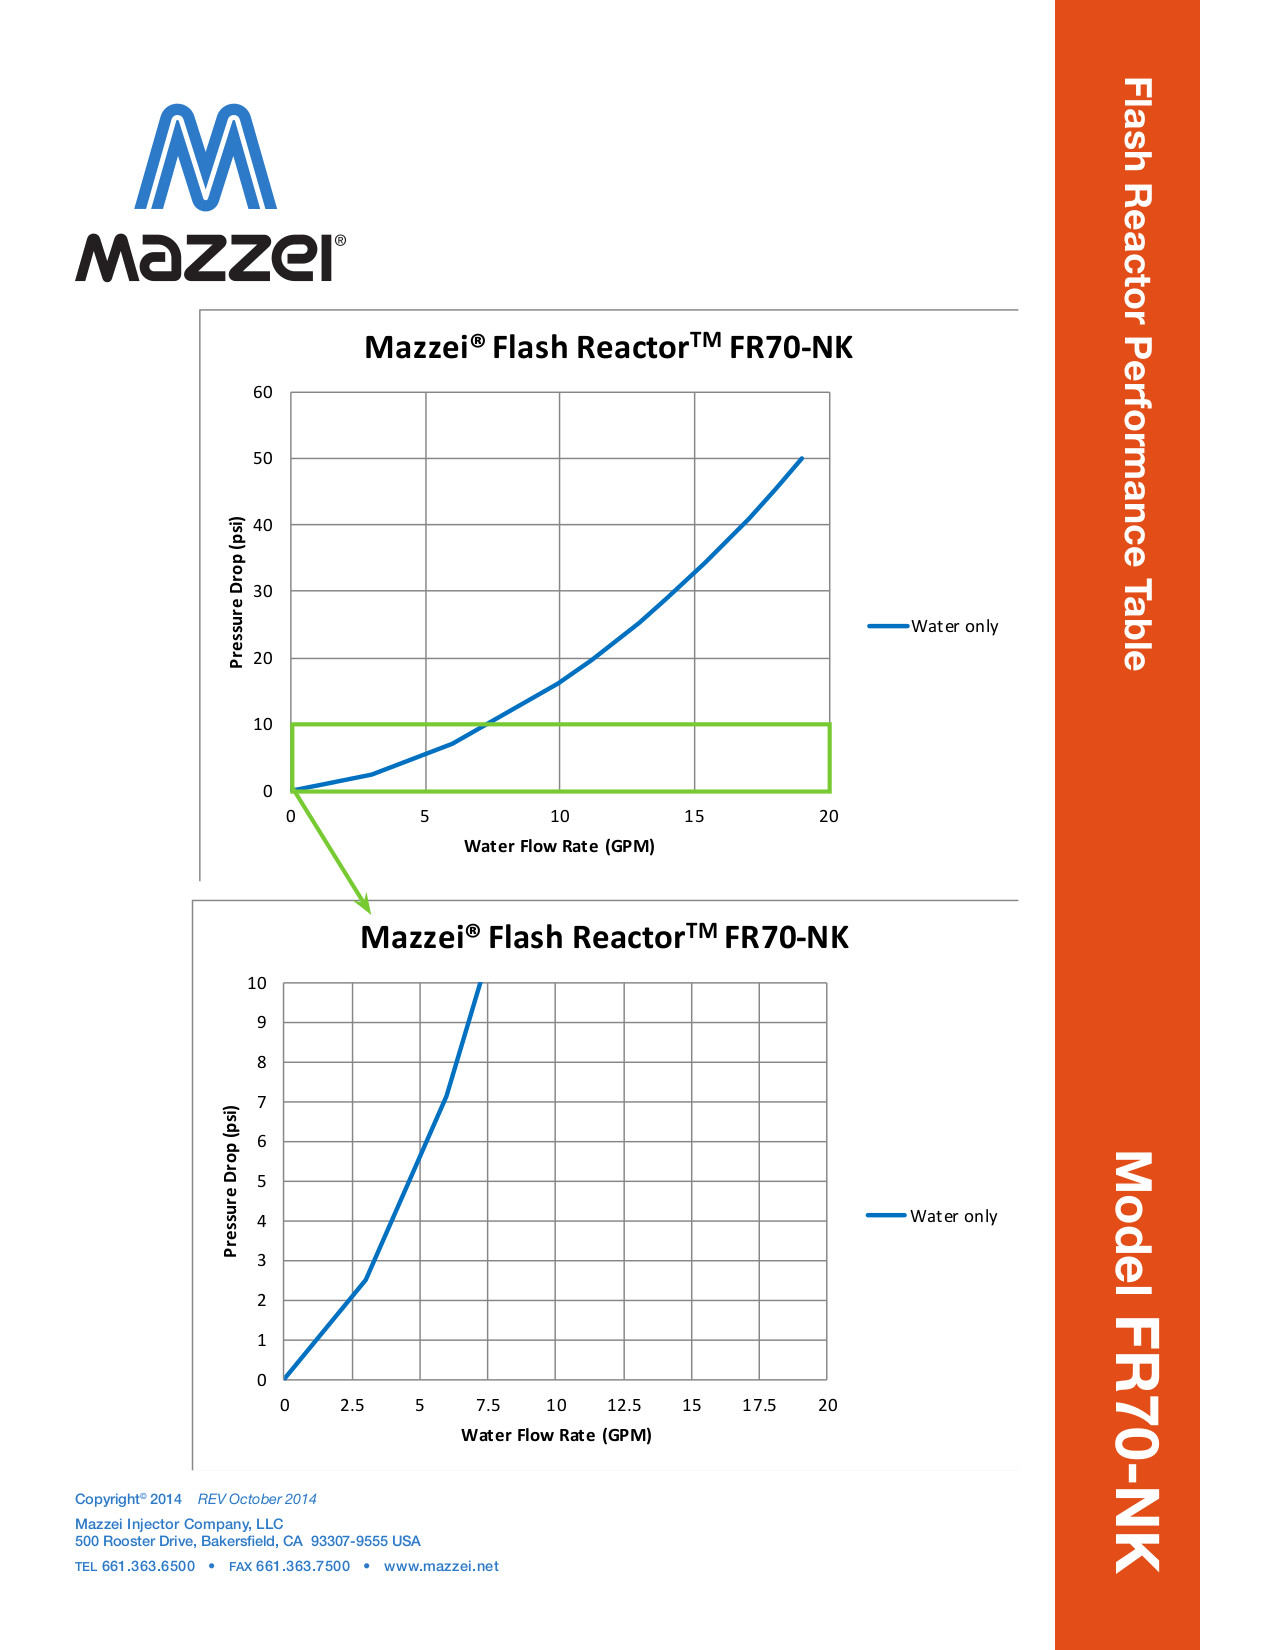 Performance Data for the FR-70-NK Flash Reactor